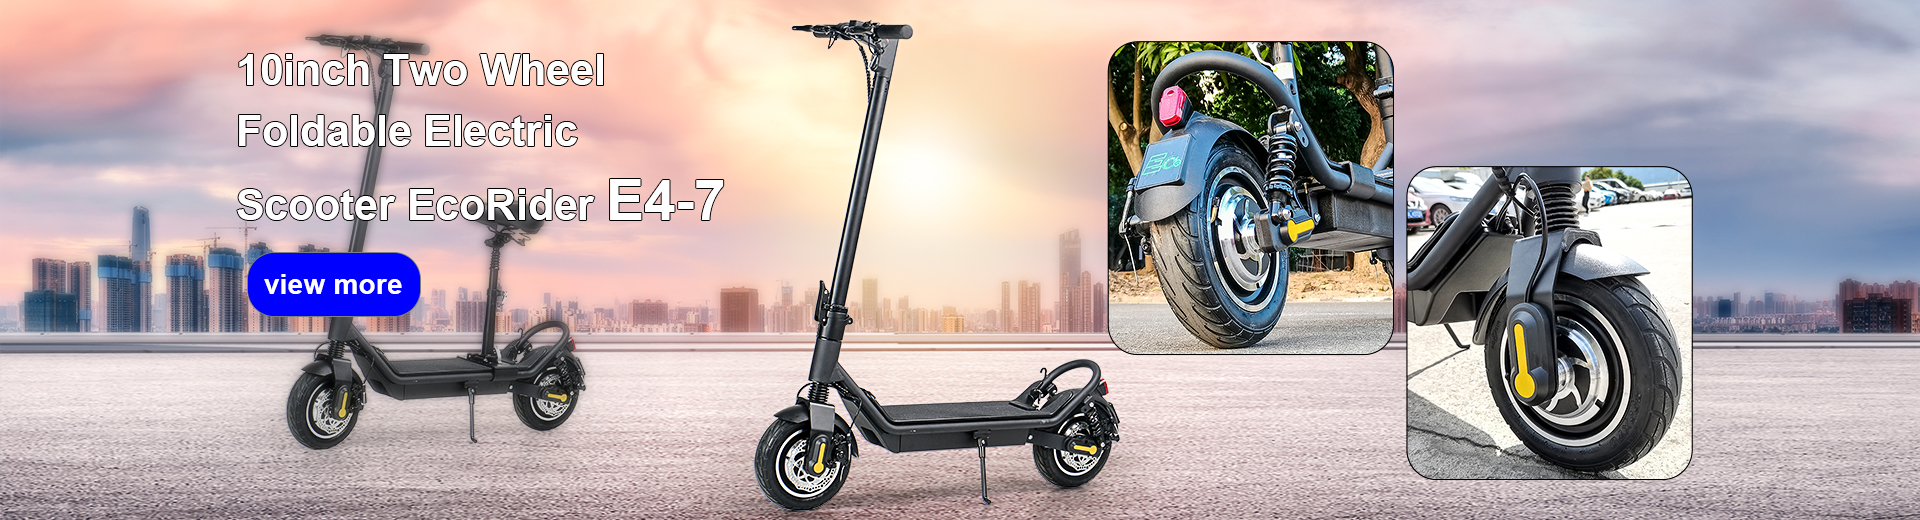 10inch Two Wheel Foldable Electric Scooter EcoRider E4-7